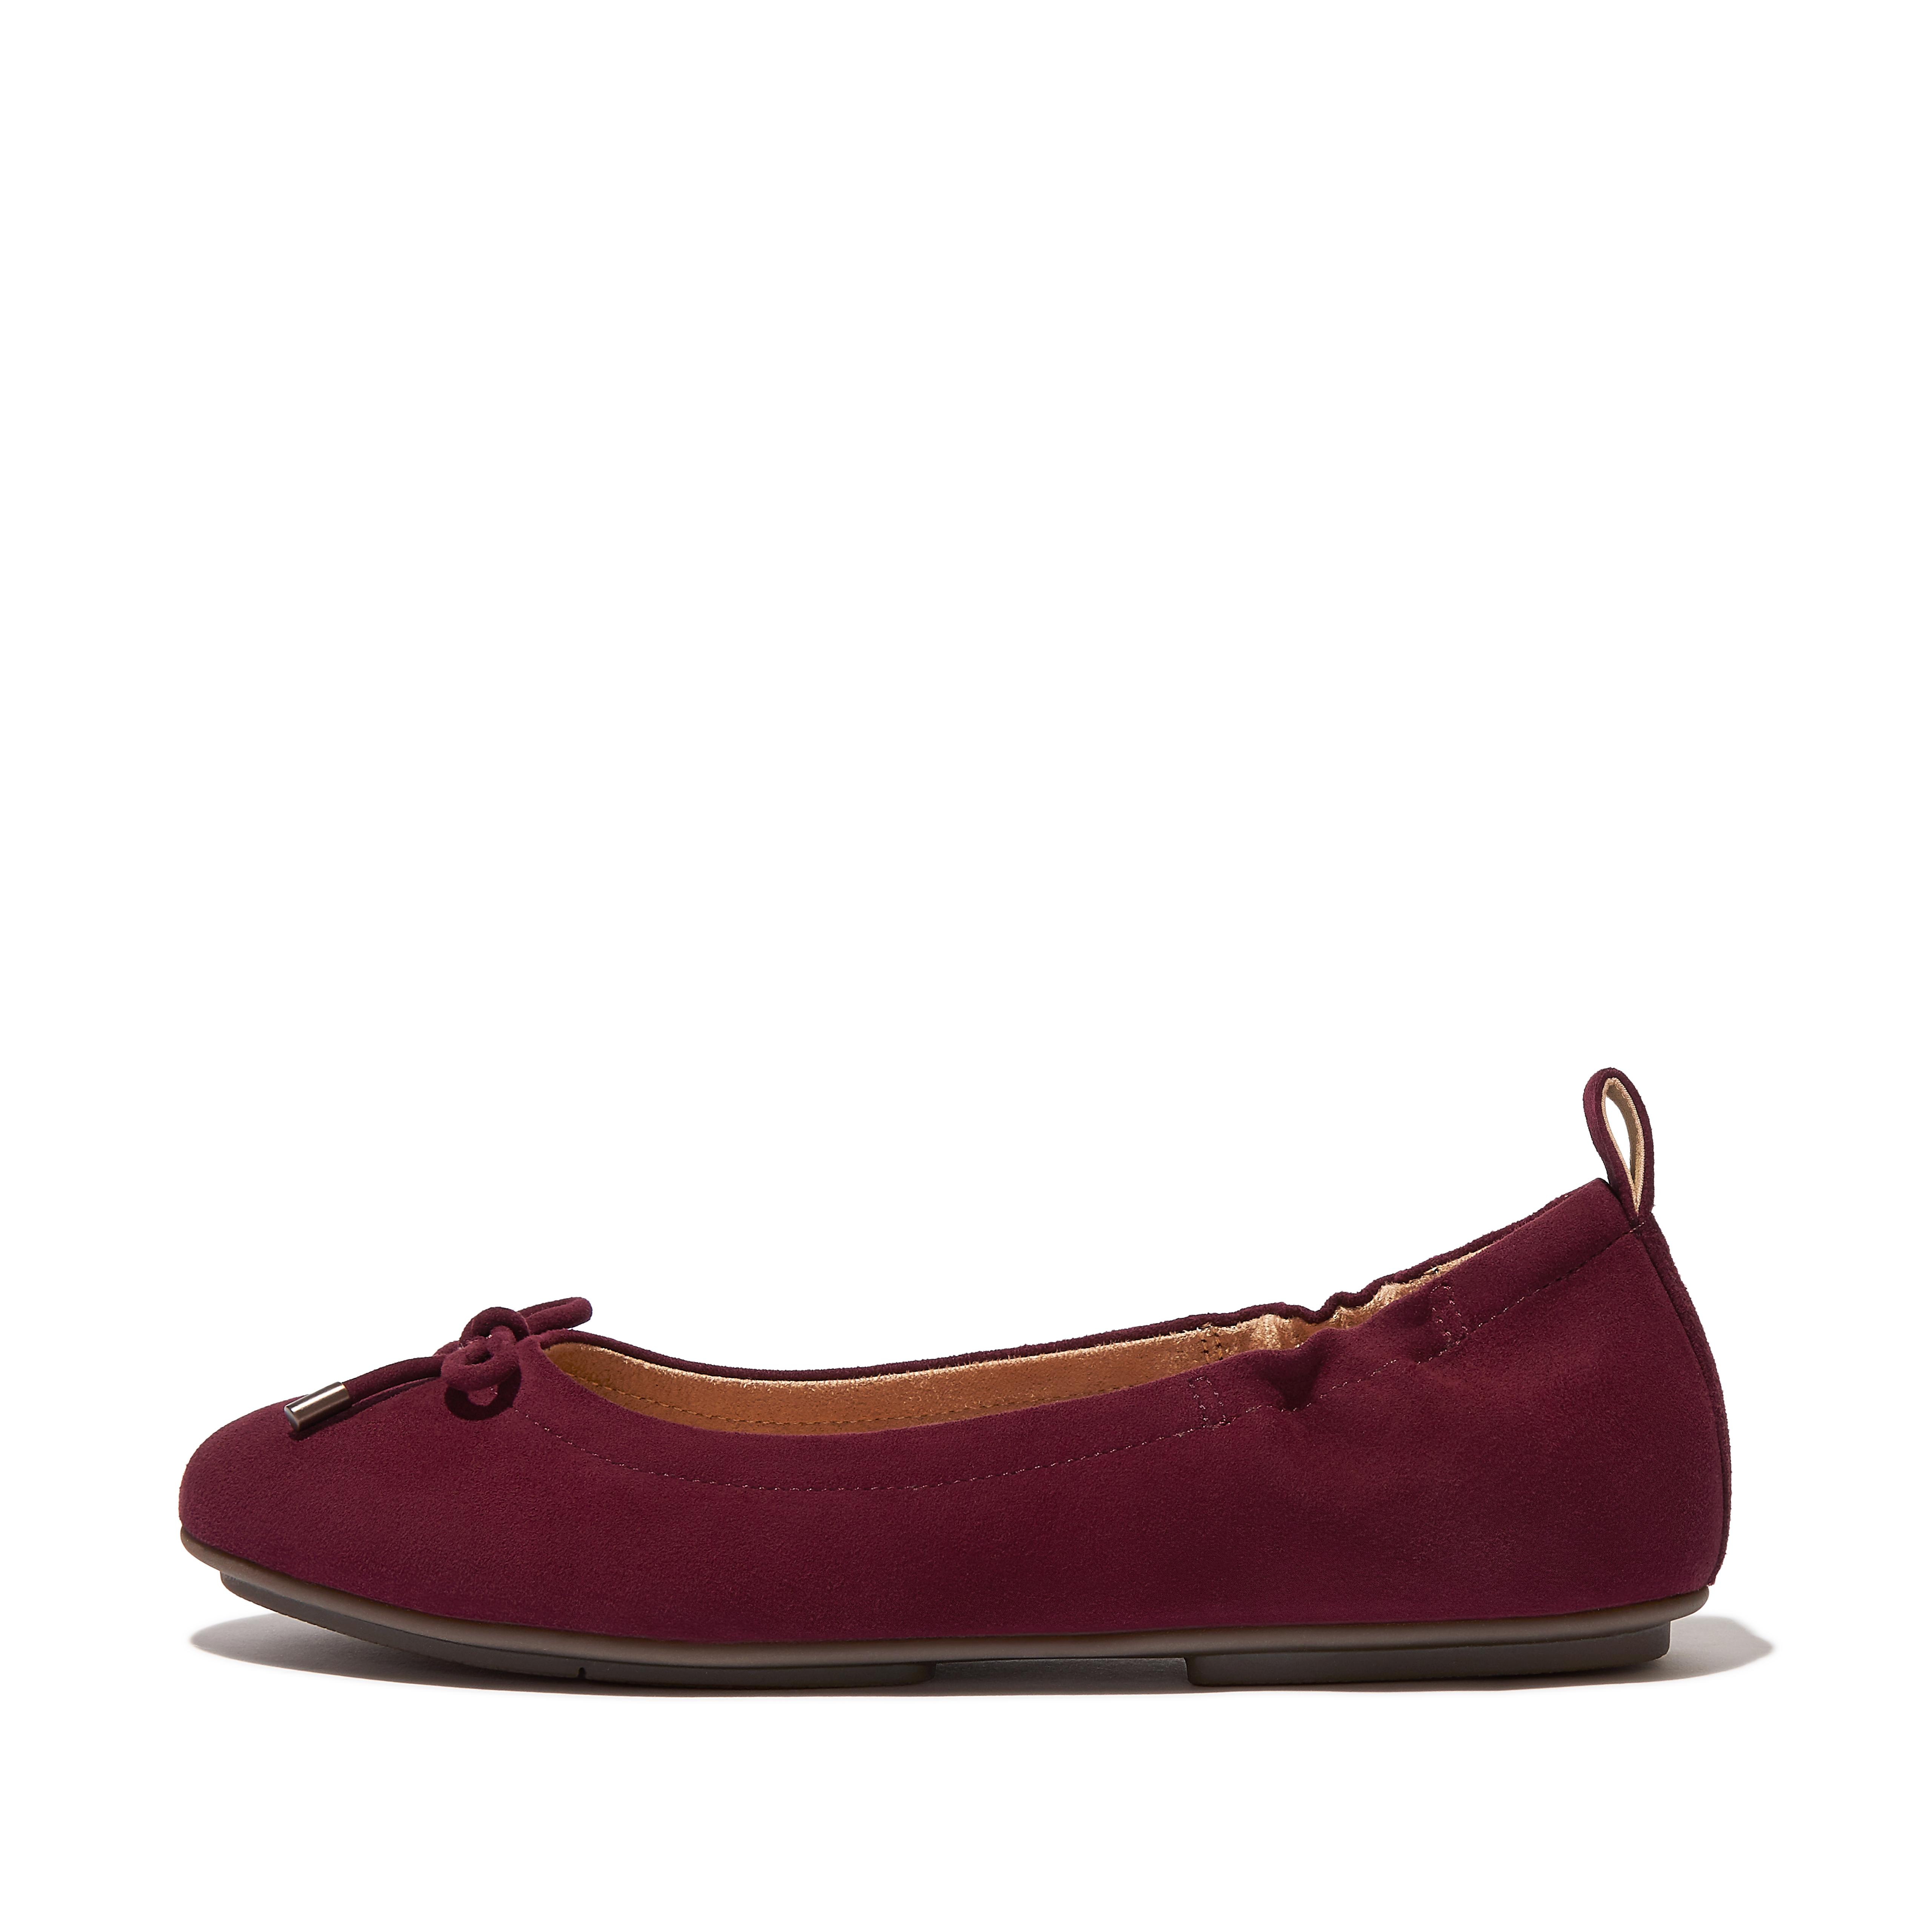 Fitflop Bow Suede Ballet flats,Plummy